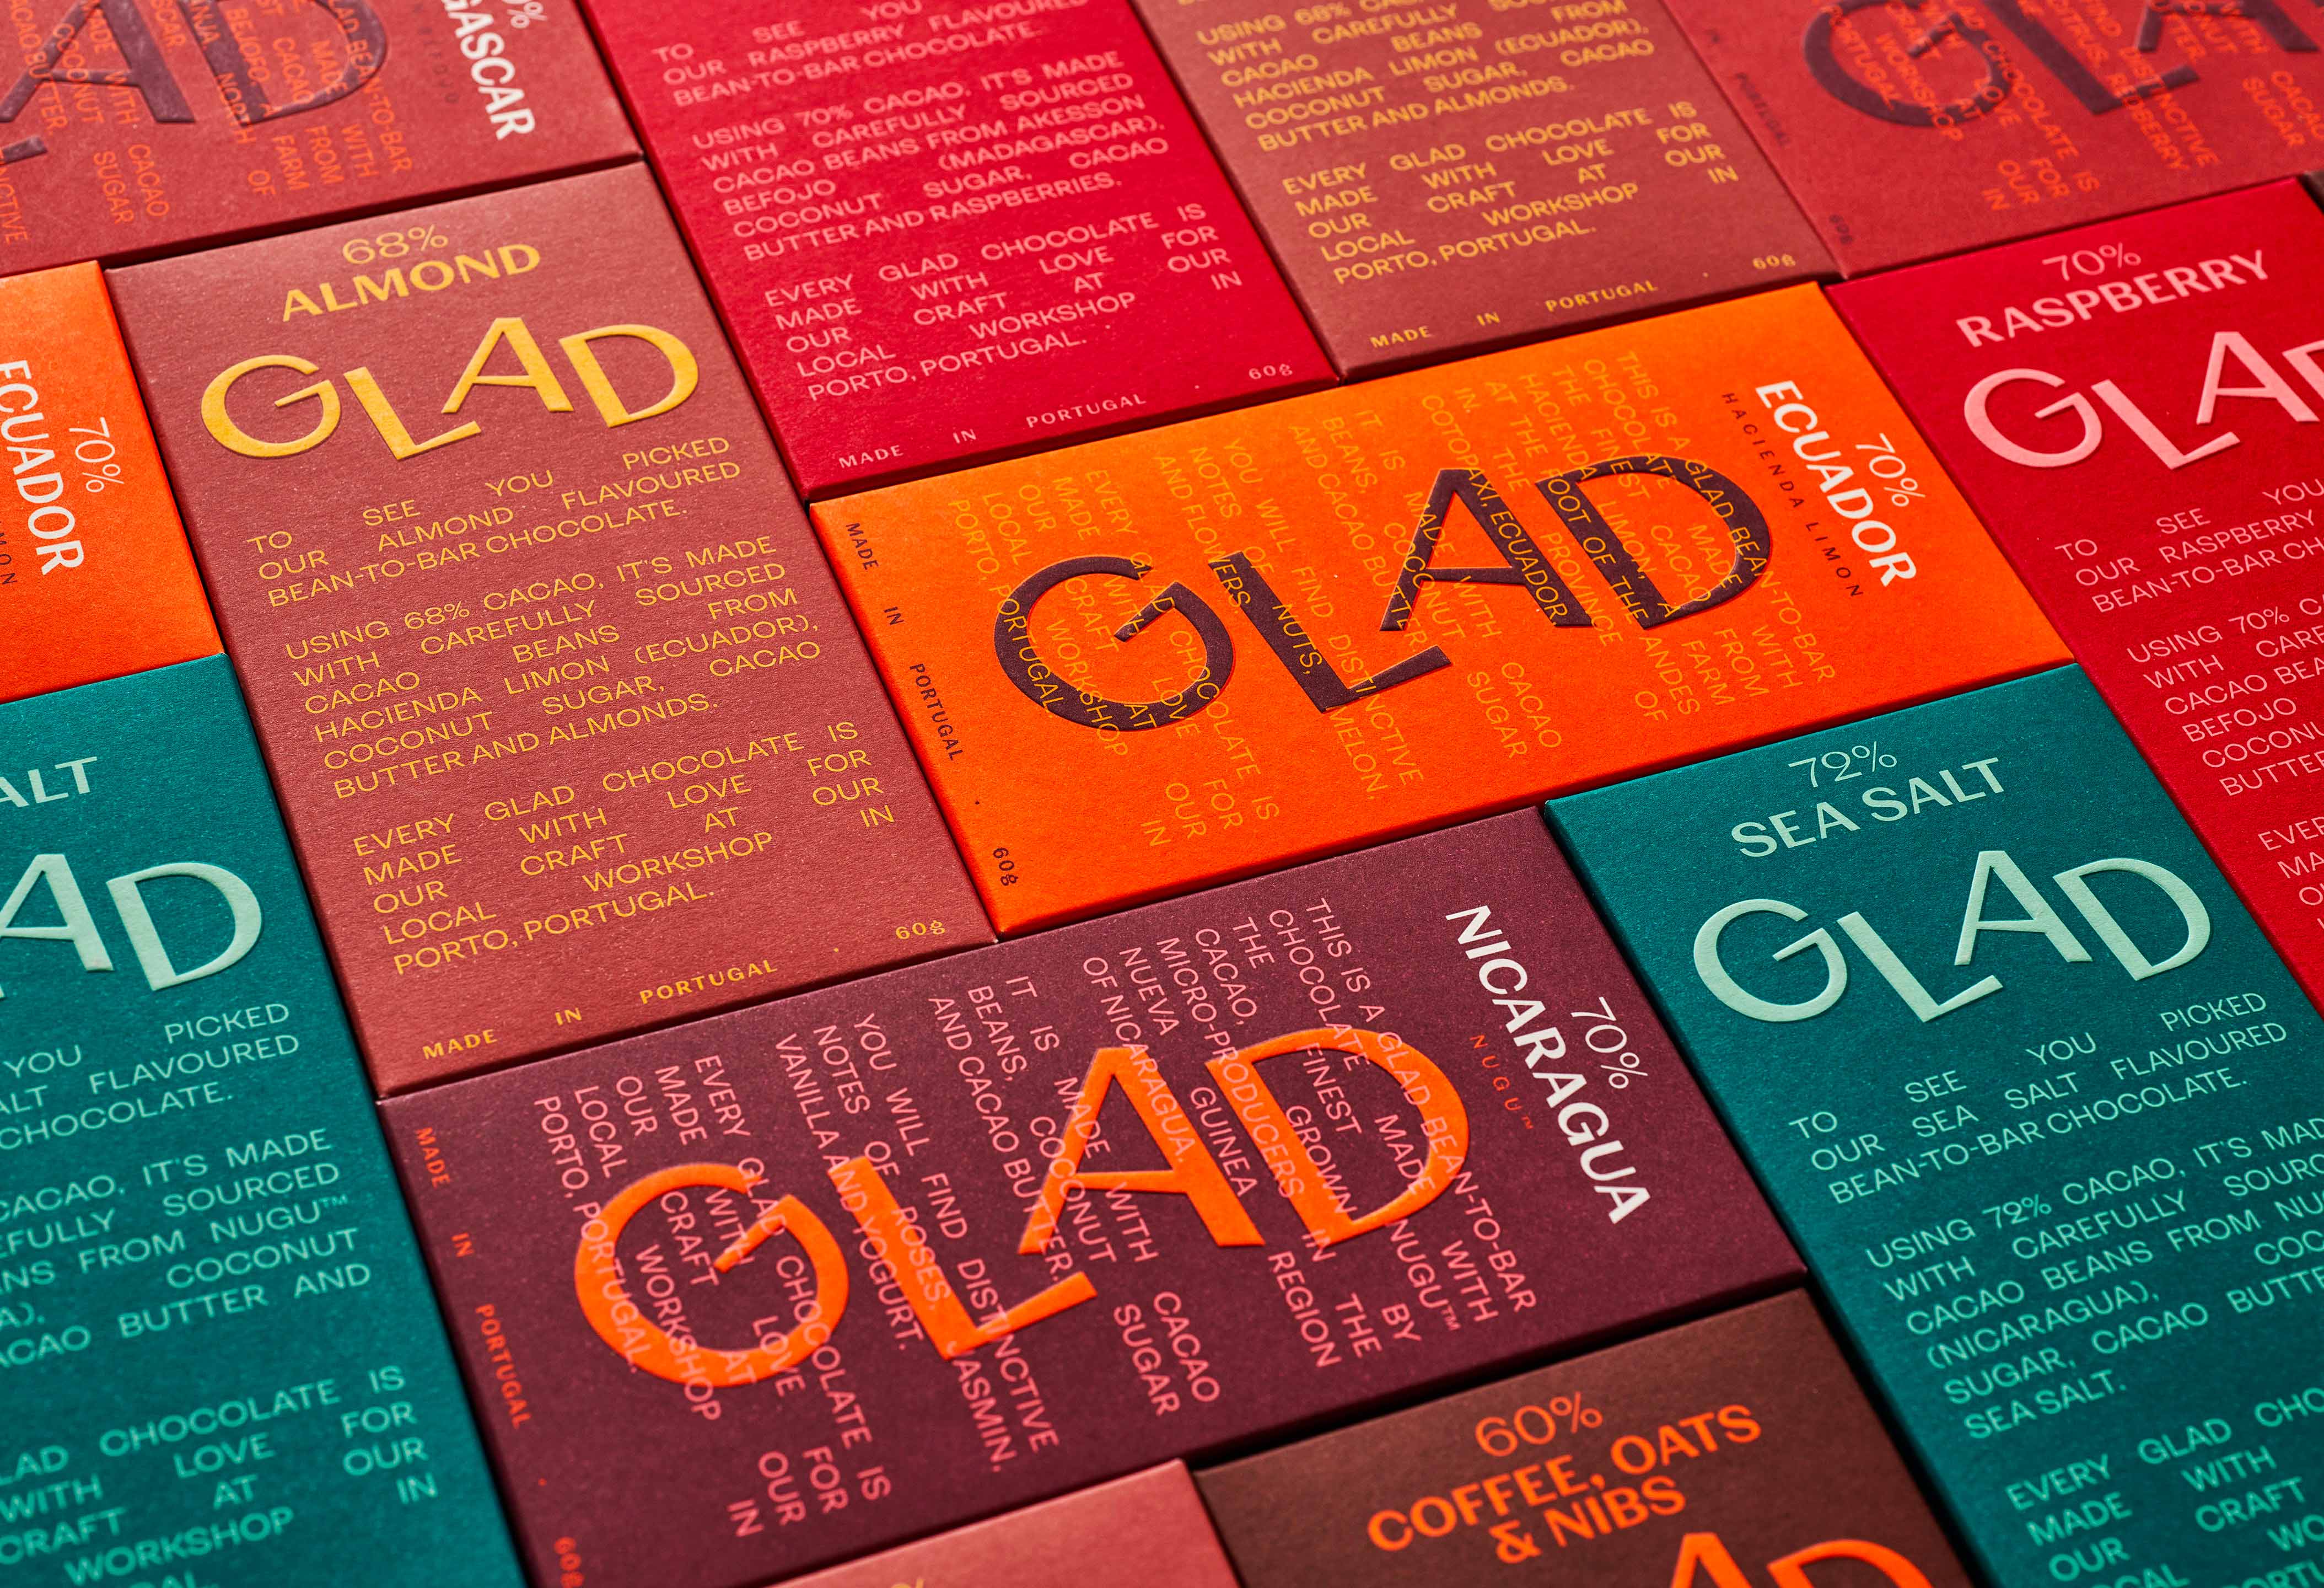 Glad Bean-to-Bar Chocolates Branding and PackagingDesign by Volta Studio